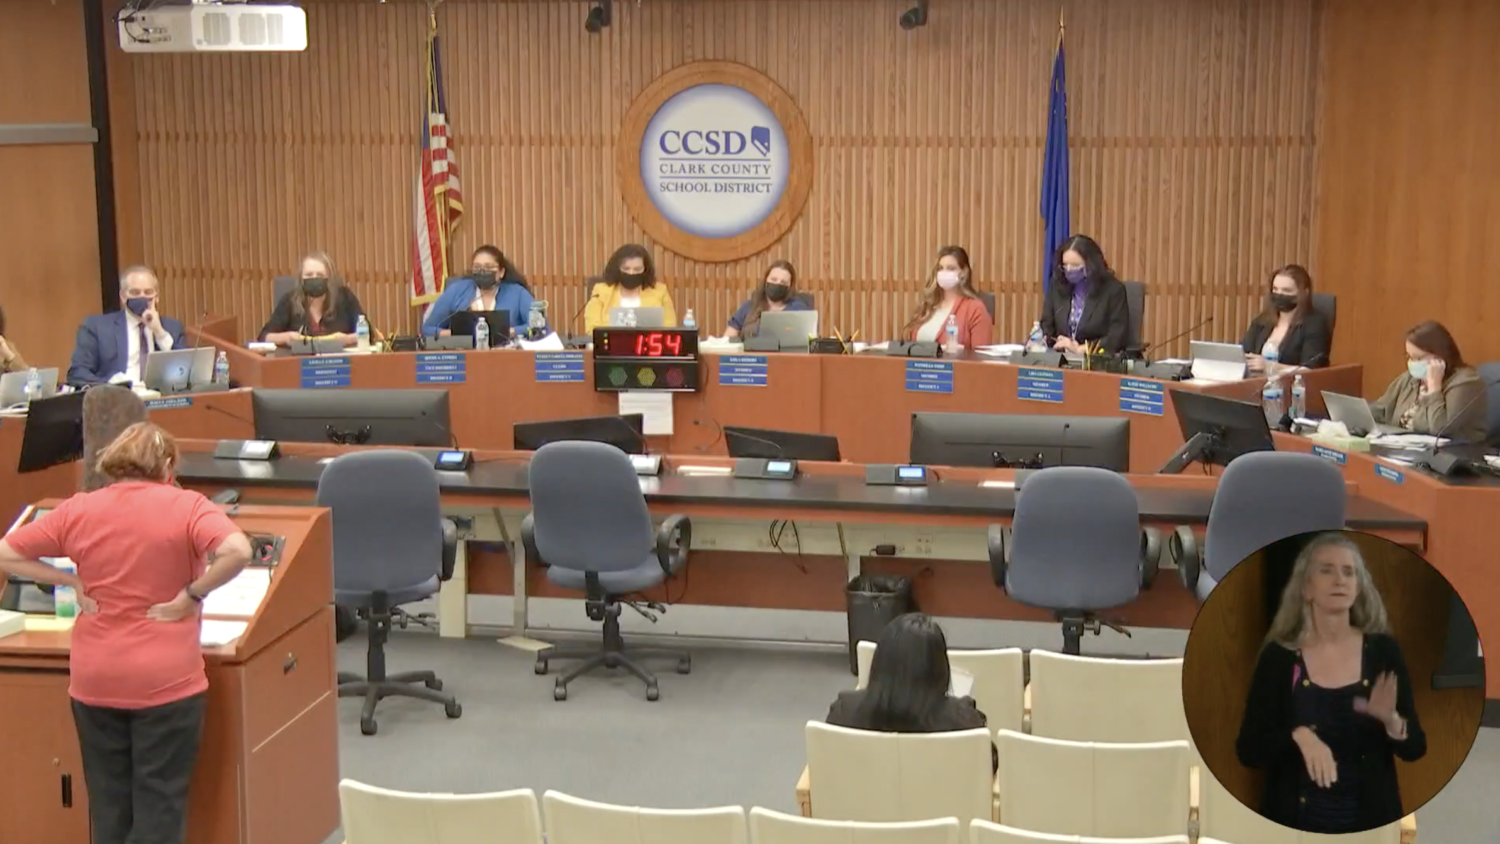 At Thursday’s School Board meeting, teachers spoke about the current failure of the ccsd funding of insurance deficit. “I wouldve loved to teach for another 5-10 years, but I was tired of seeing other educators get ill or die too young from stress induced illnesses,” retired teacher Janet Clayton said. “I had to make a change to enjoy my life.” Photo Credit: Screenshot of meeting
